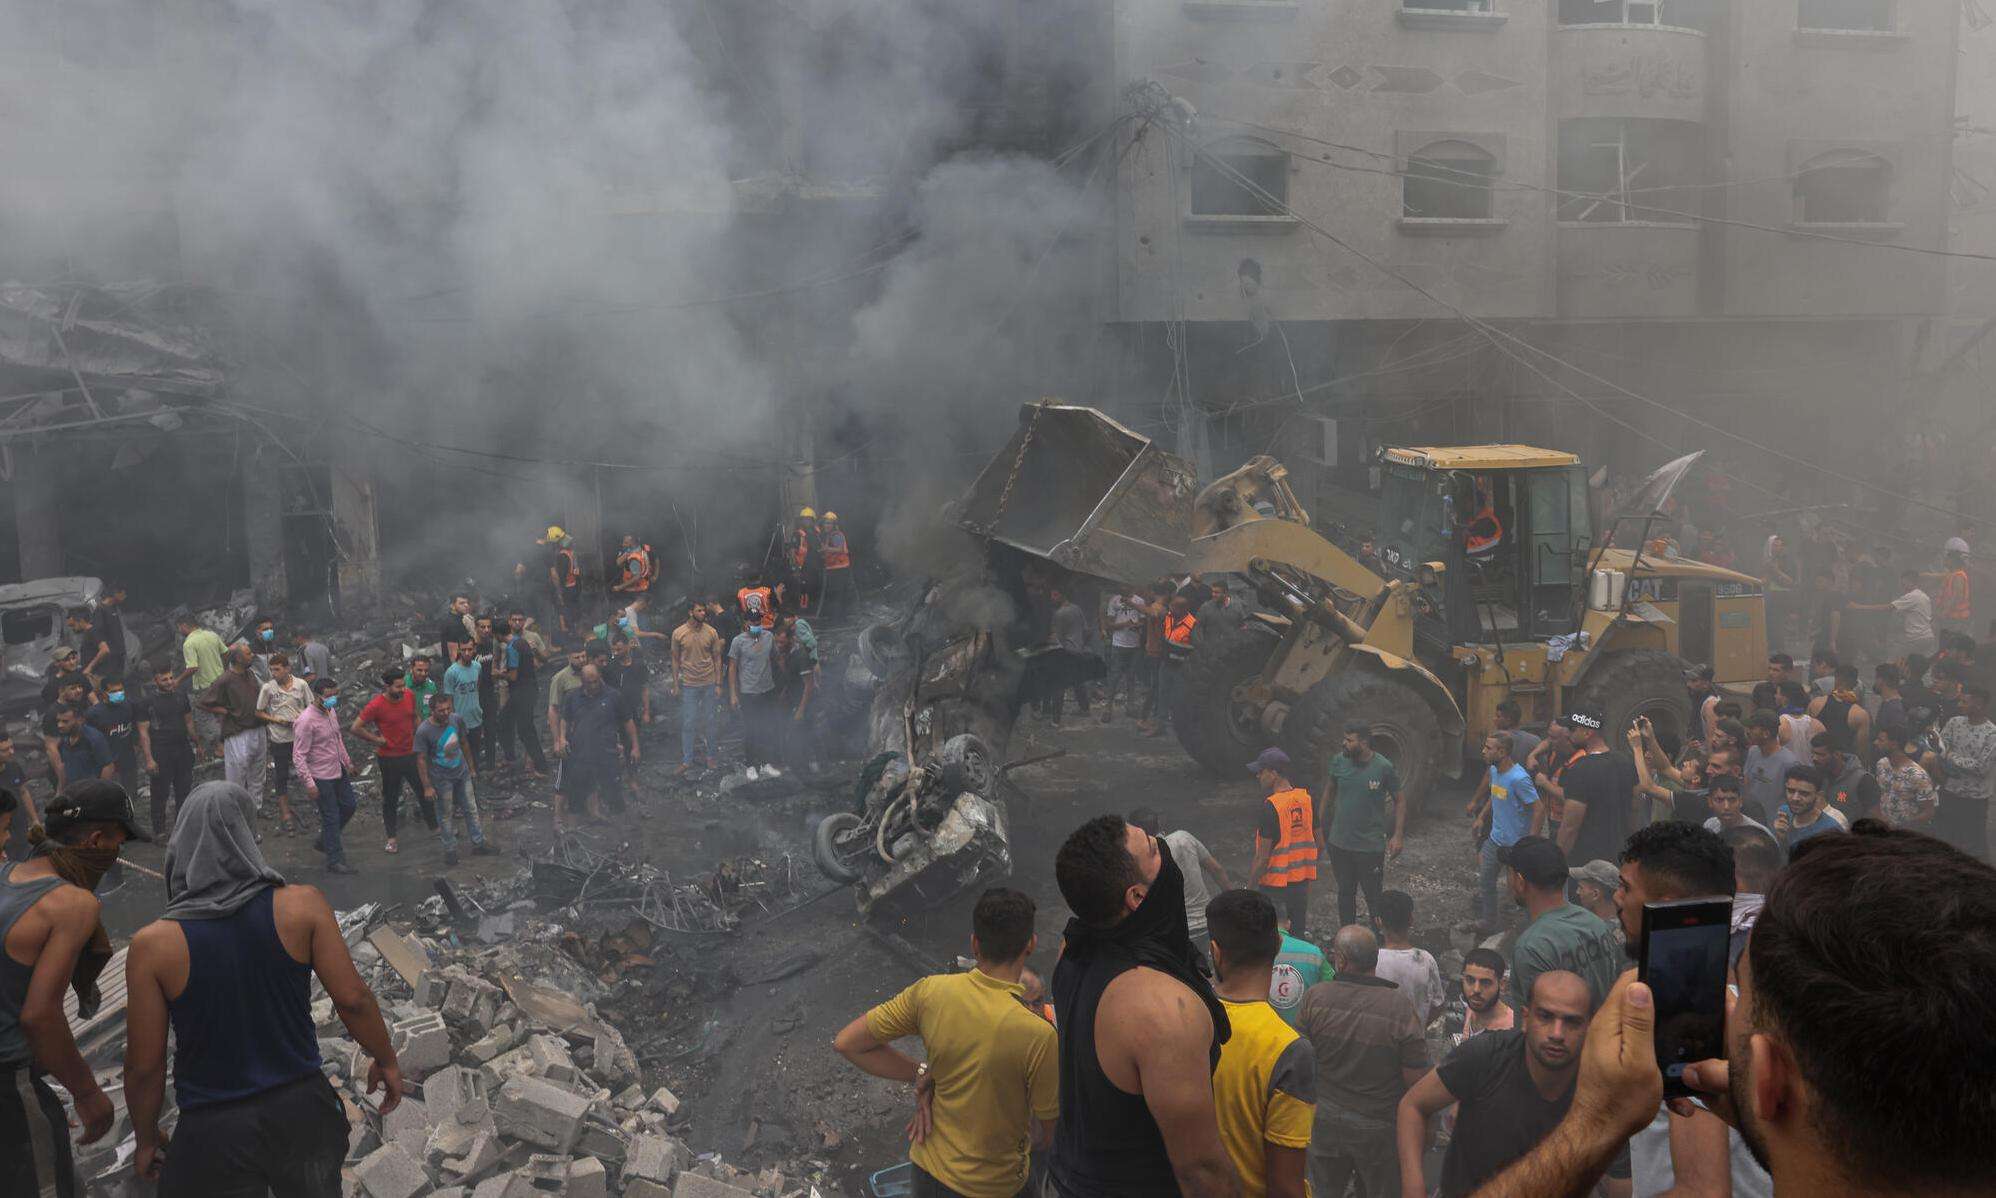 A crowd of Palestinians surrounded by rubble and smoke from Israeli airstrikes in Gaza.